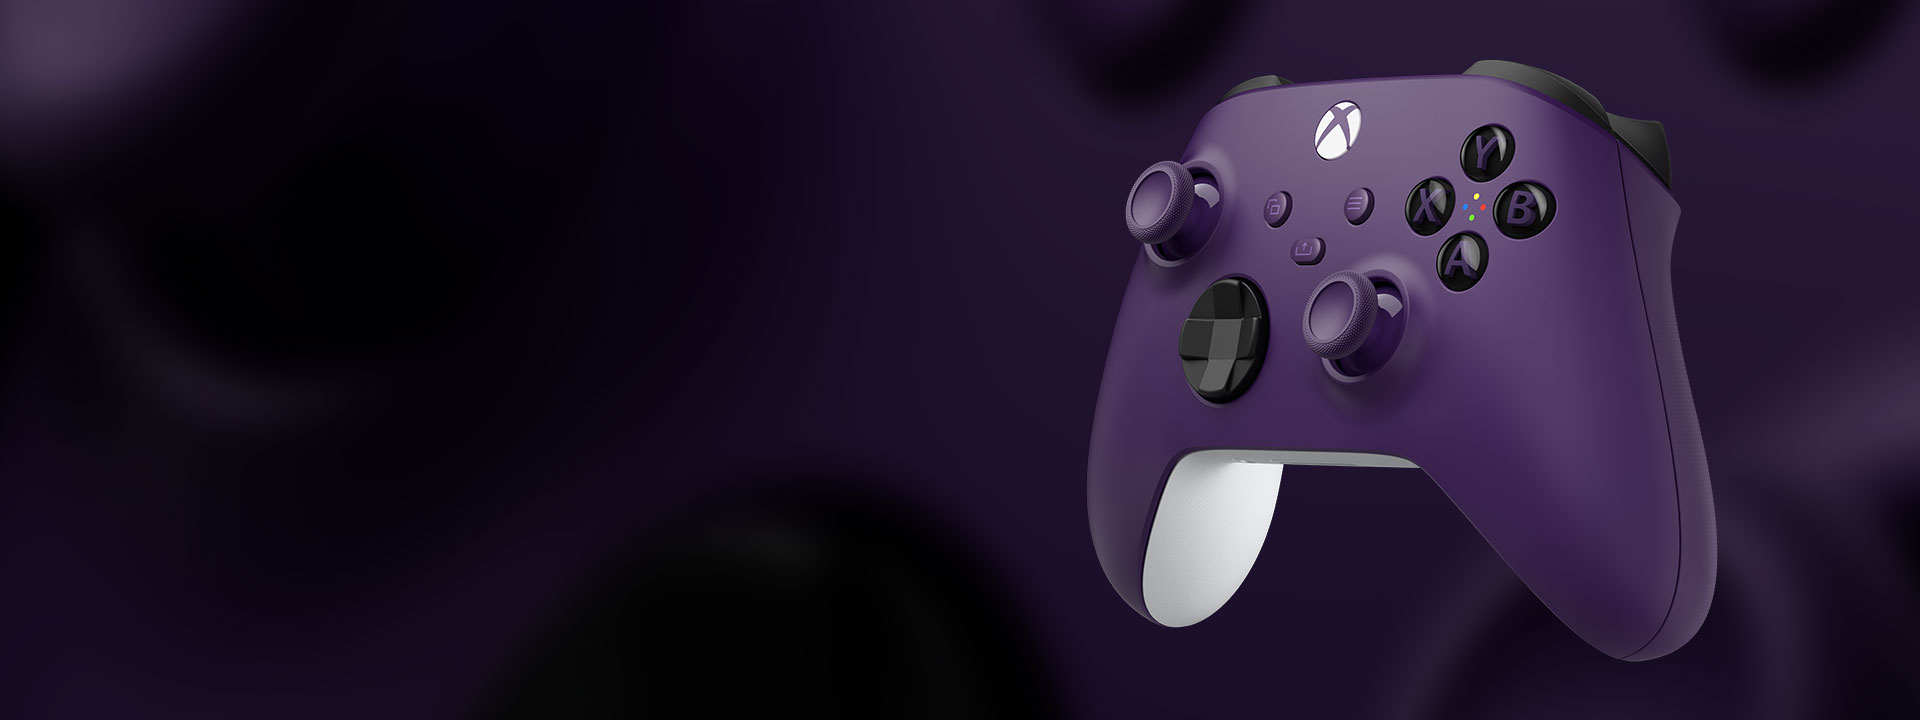 Earn Victory Royale in Style with the Xbox Wireless Controller